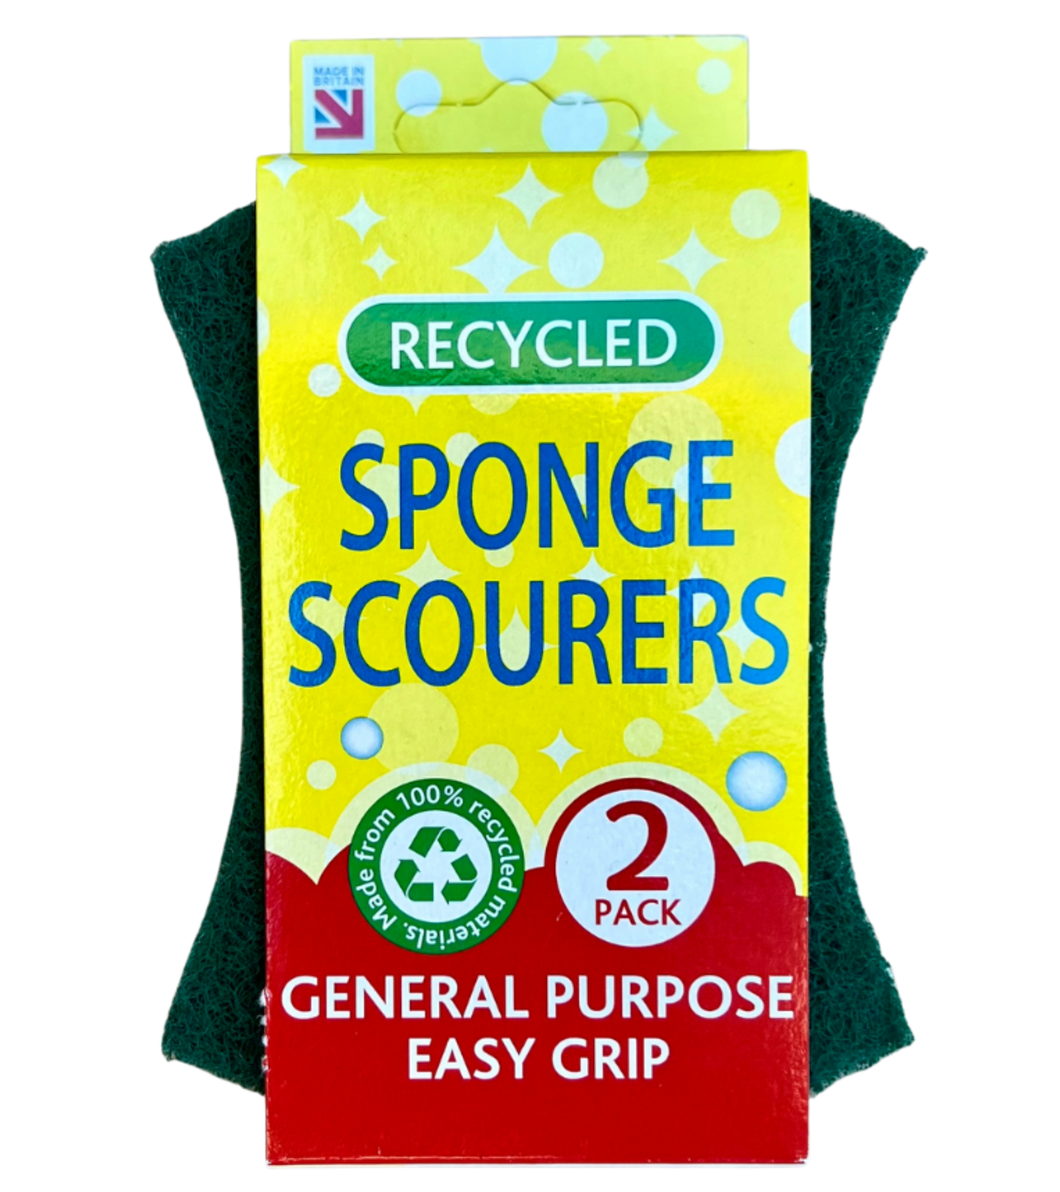 Dishmatic ECO Recycled Sponge Scourers 2 Pack